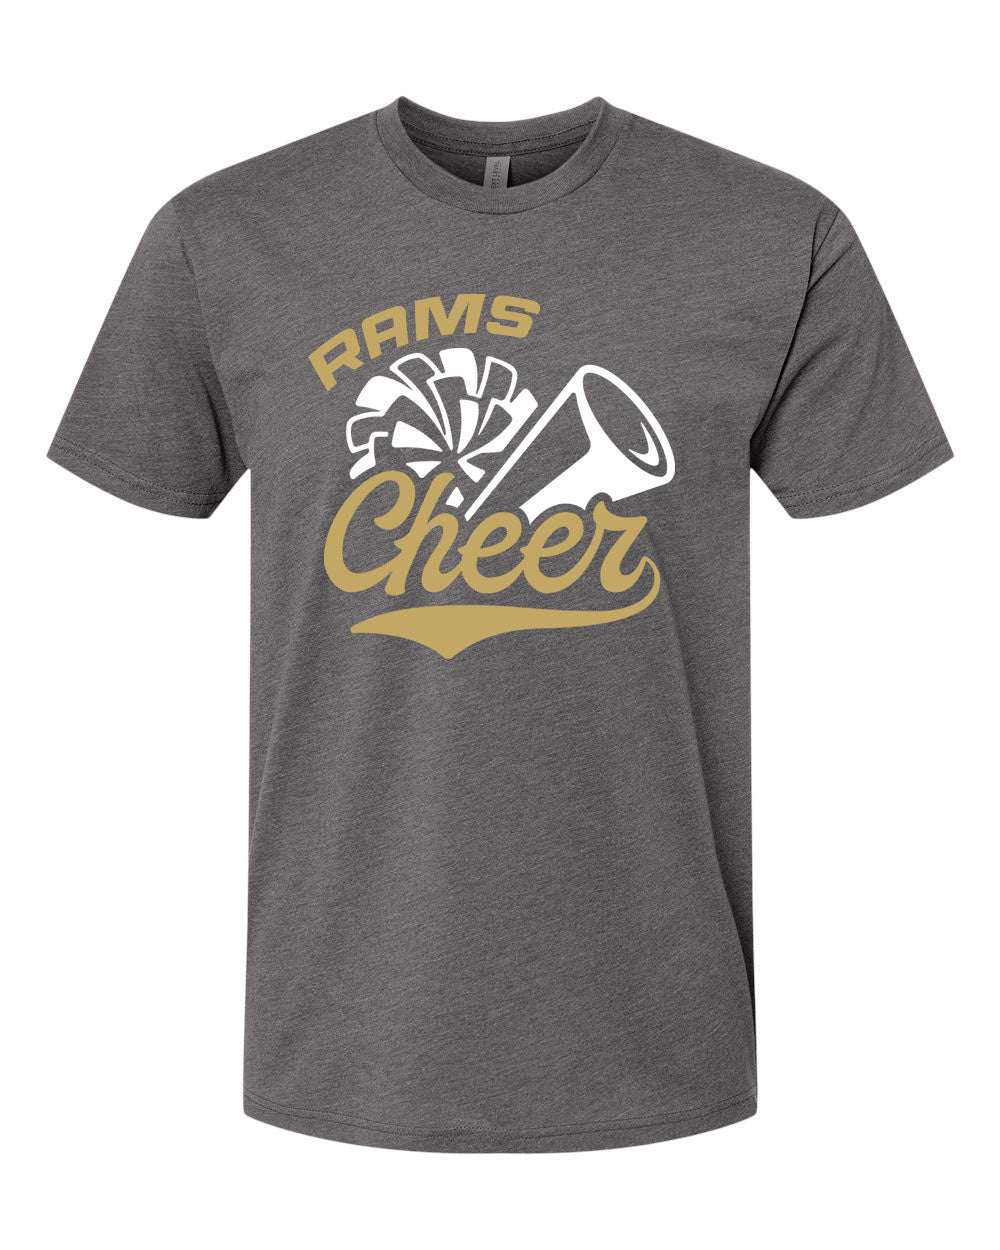 Sussex middle School Cheer design 1 T-Shirt